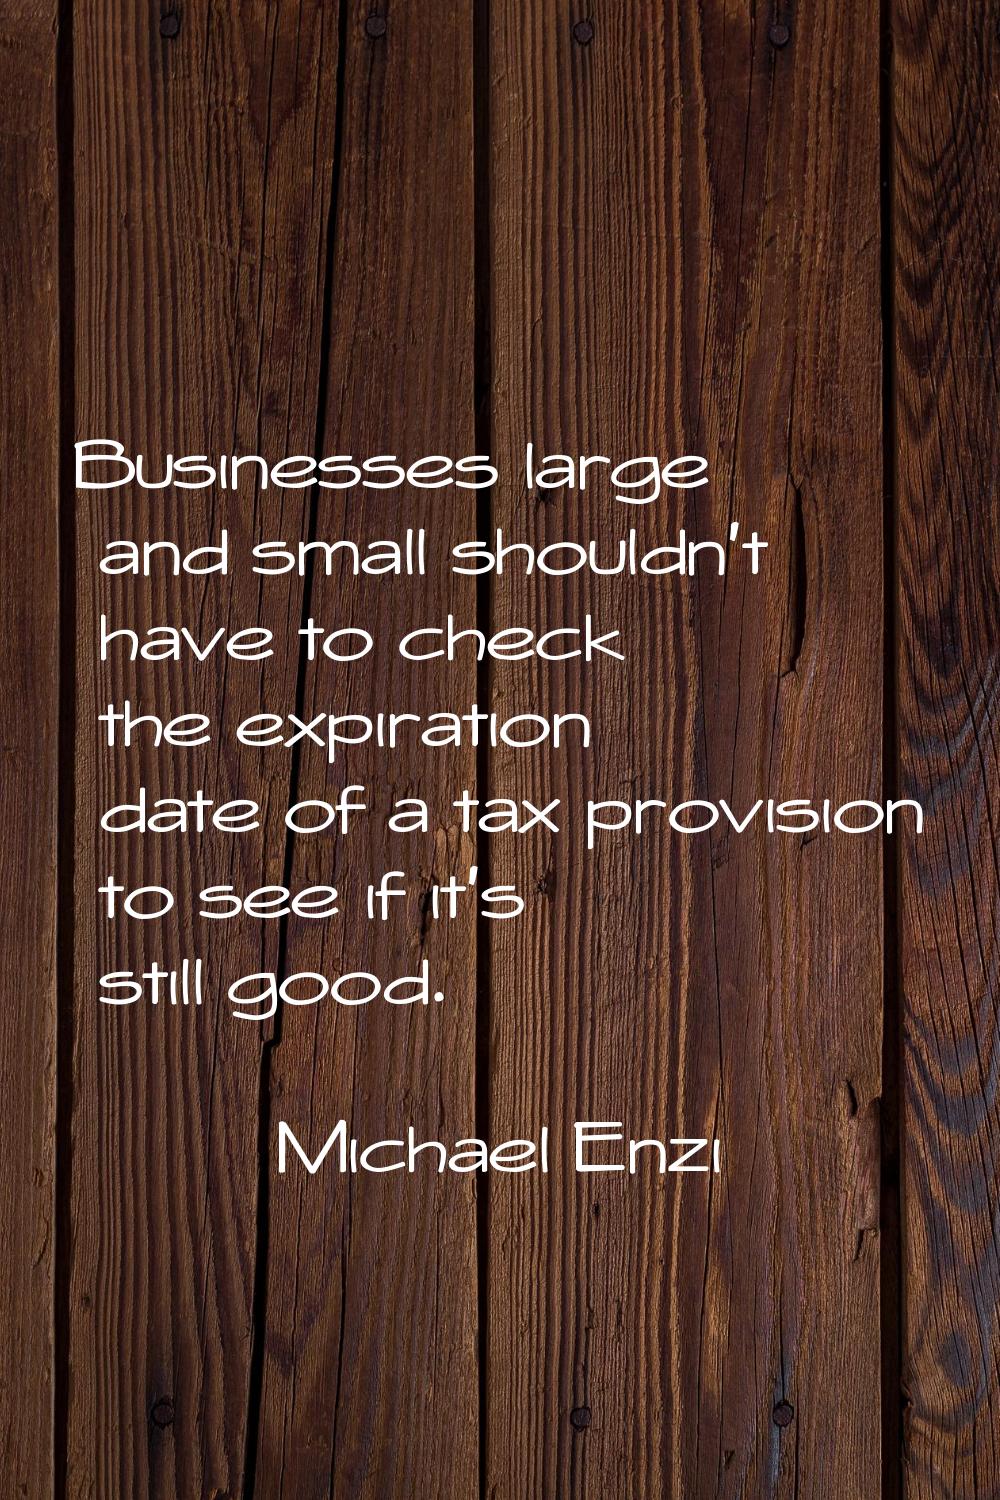 Businesses large and small shouldn't have to check the expiration date of a tax provision to see if